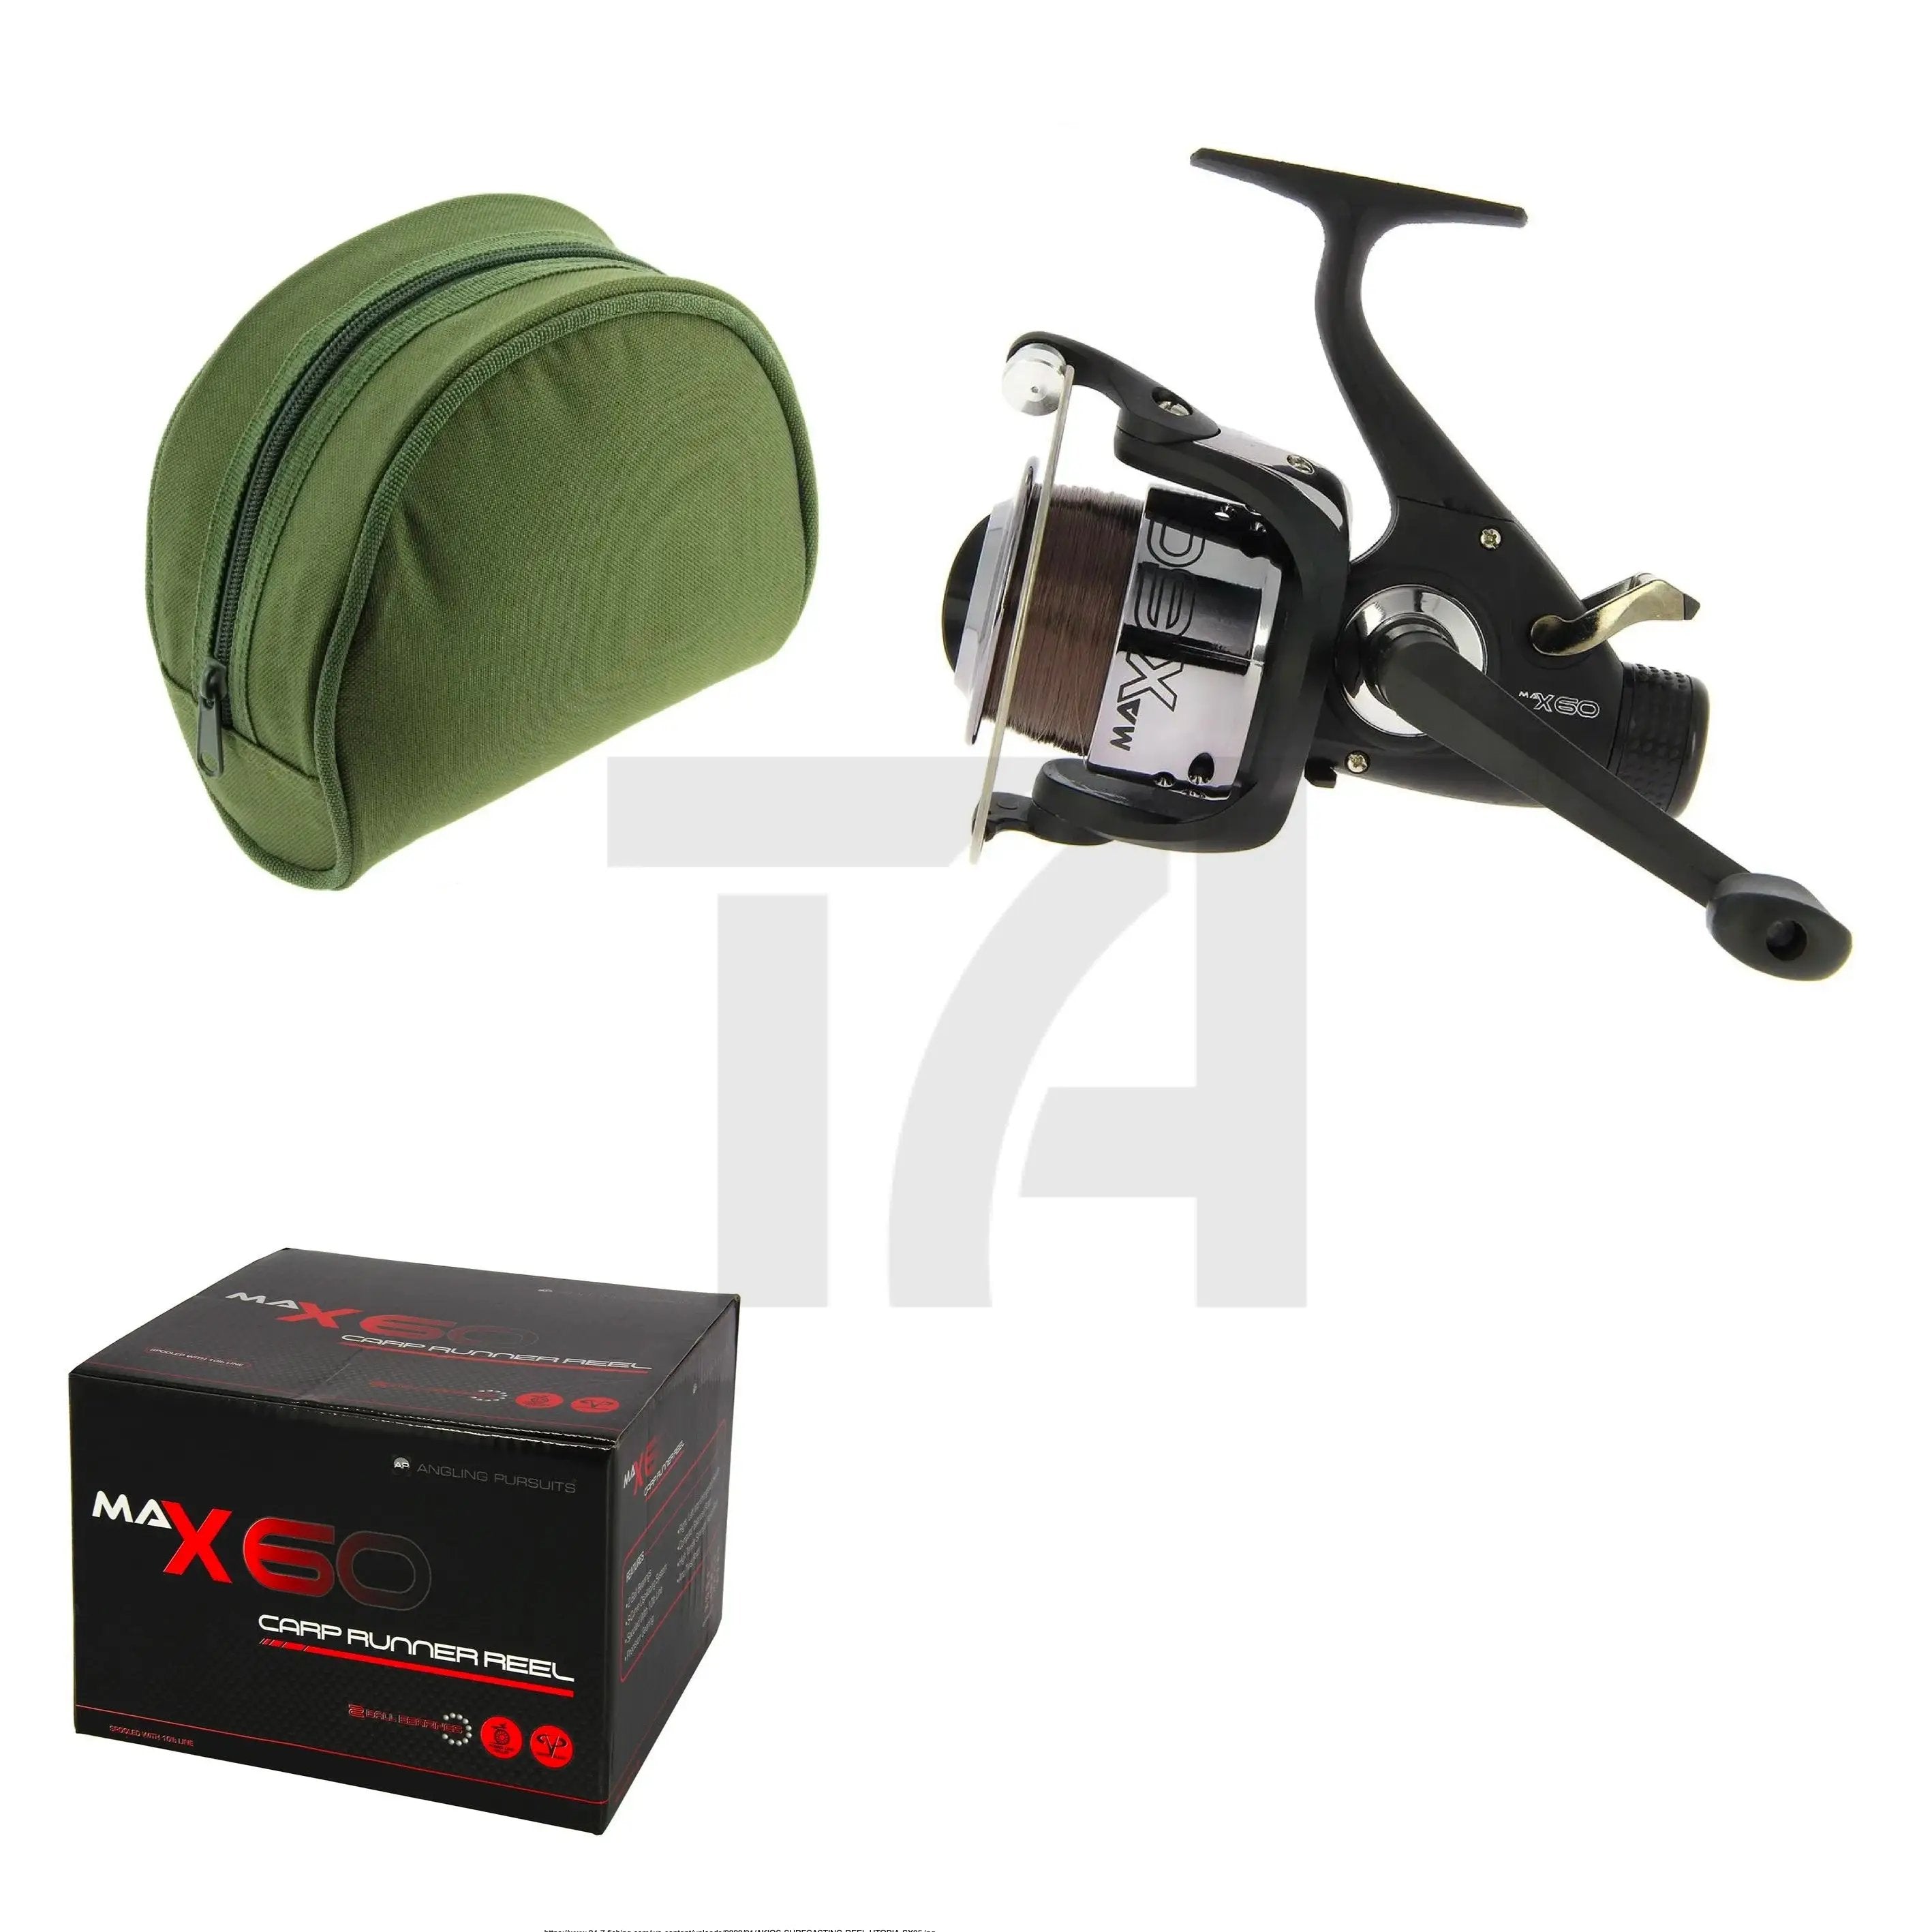 Angling Pursuits Max 60 2BB Carp Runner Fishing Reel With 10lb Line